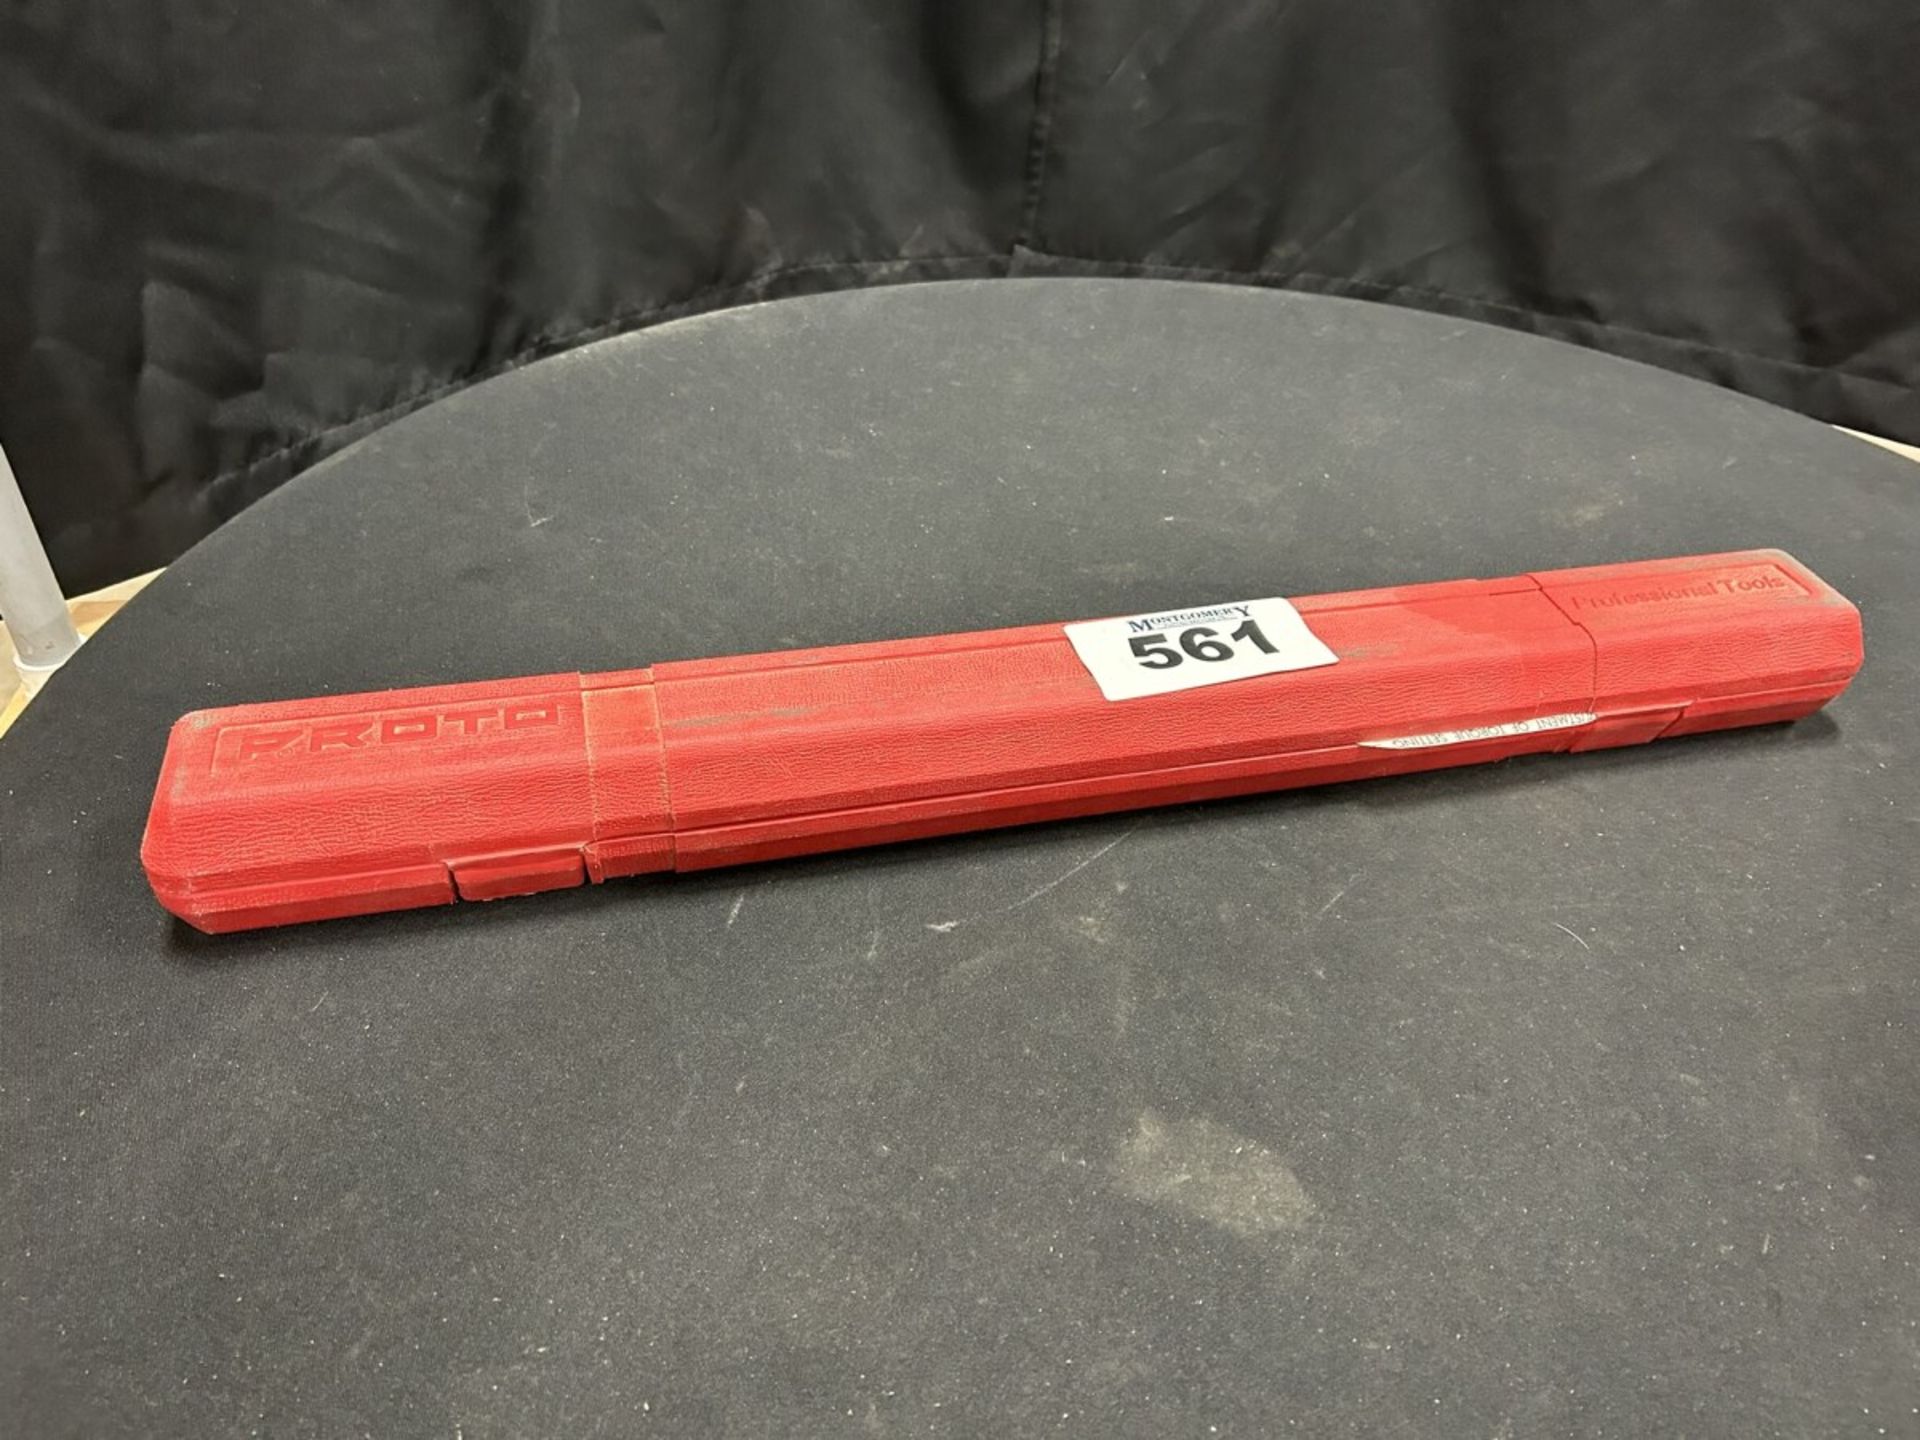 PROTO 6014 1/2" DRIVE TORQUE WRENCH - 50-250 FT/LBS - Image 3 of 4